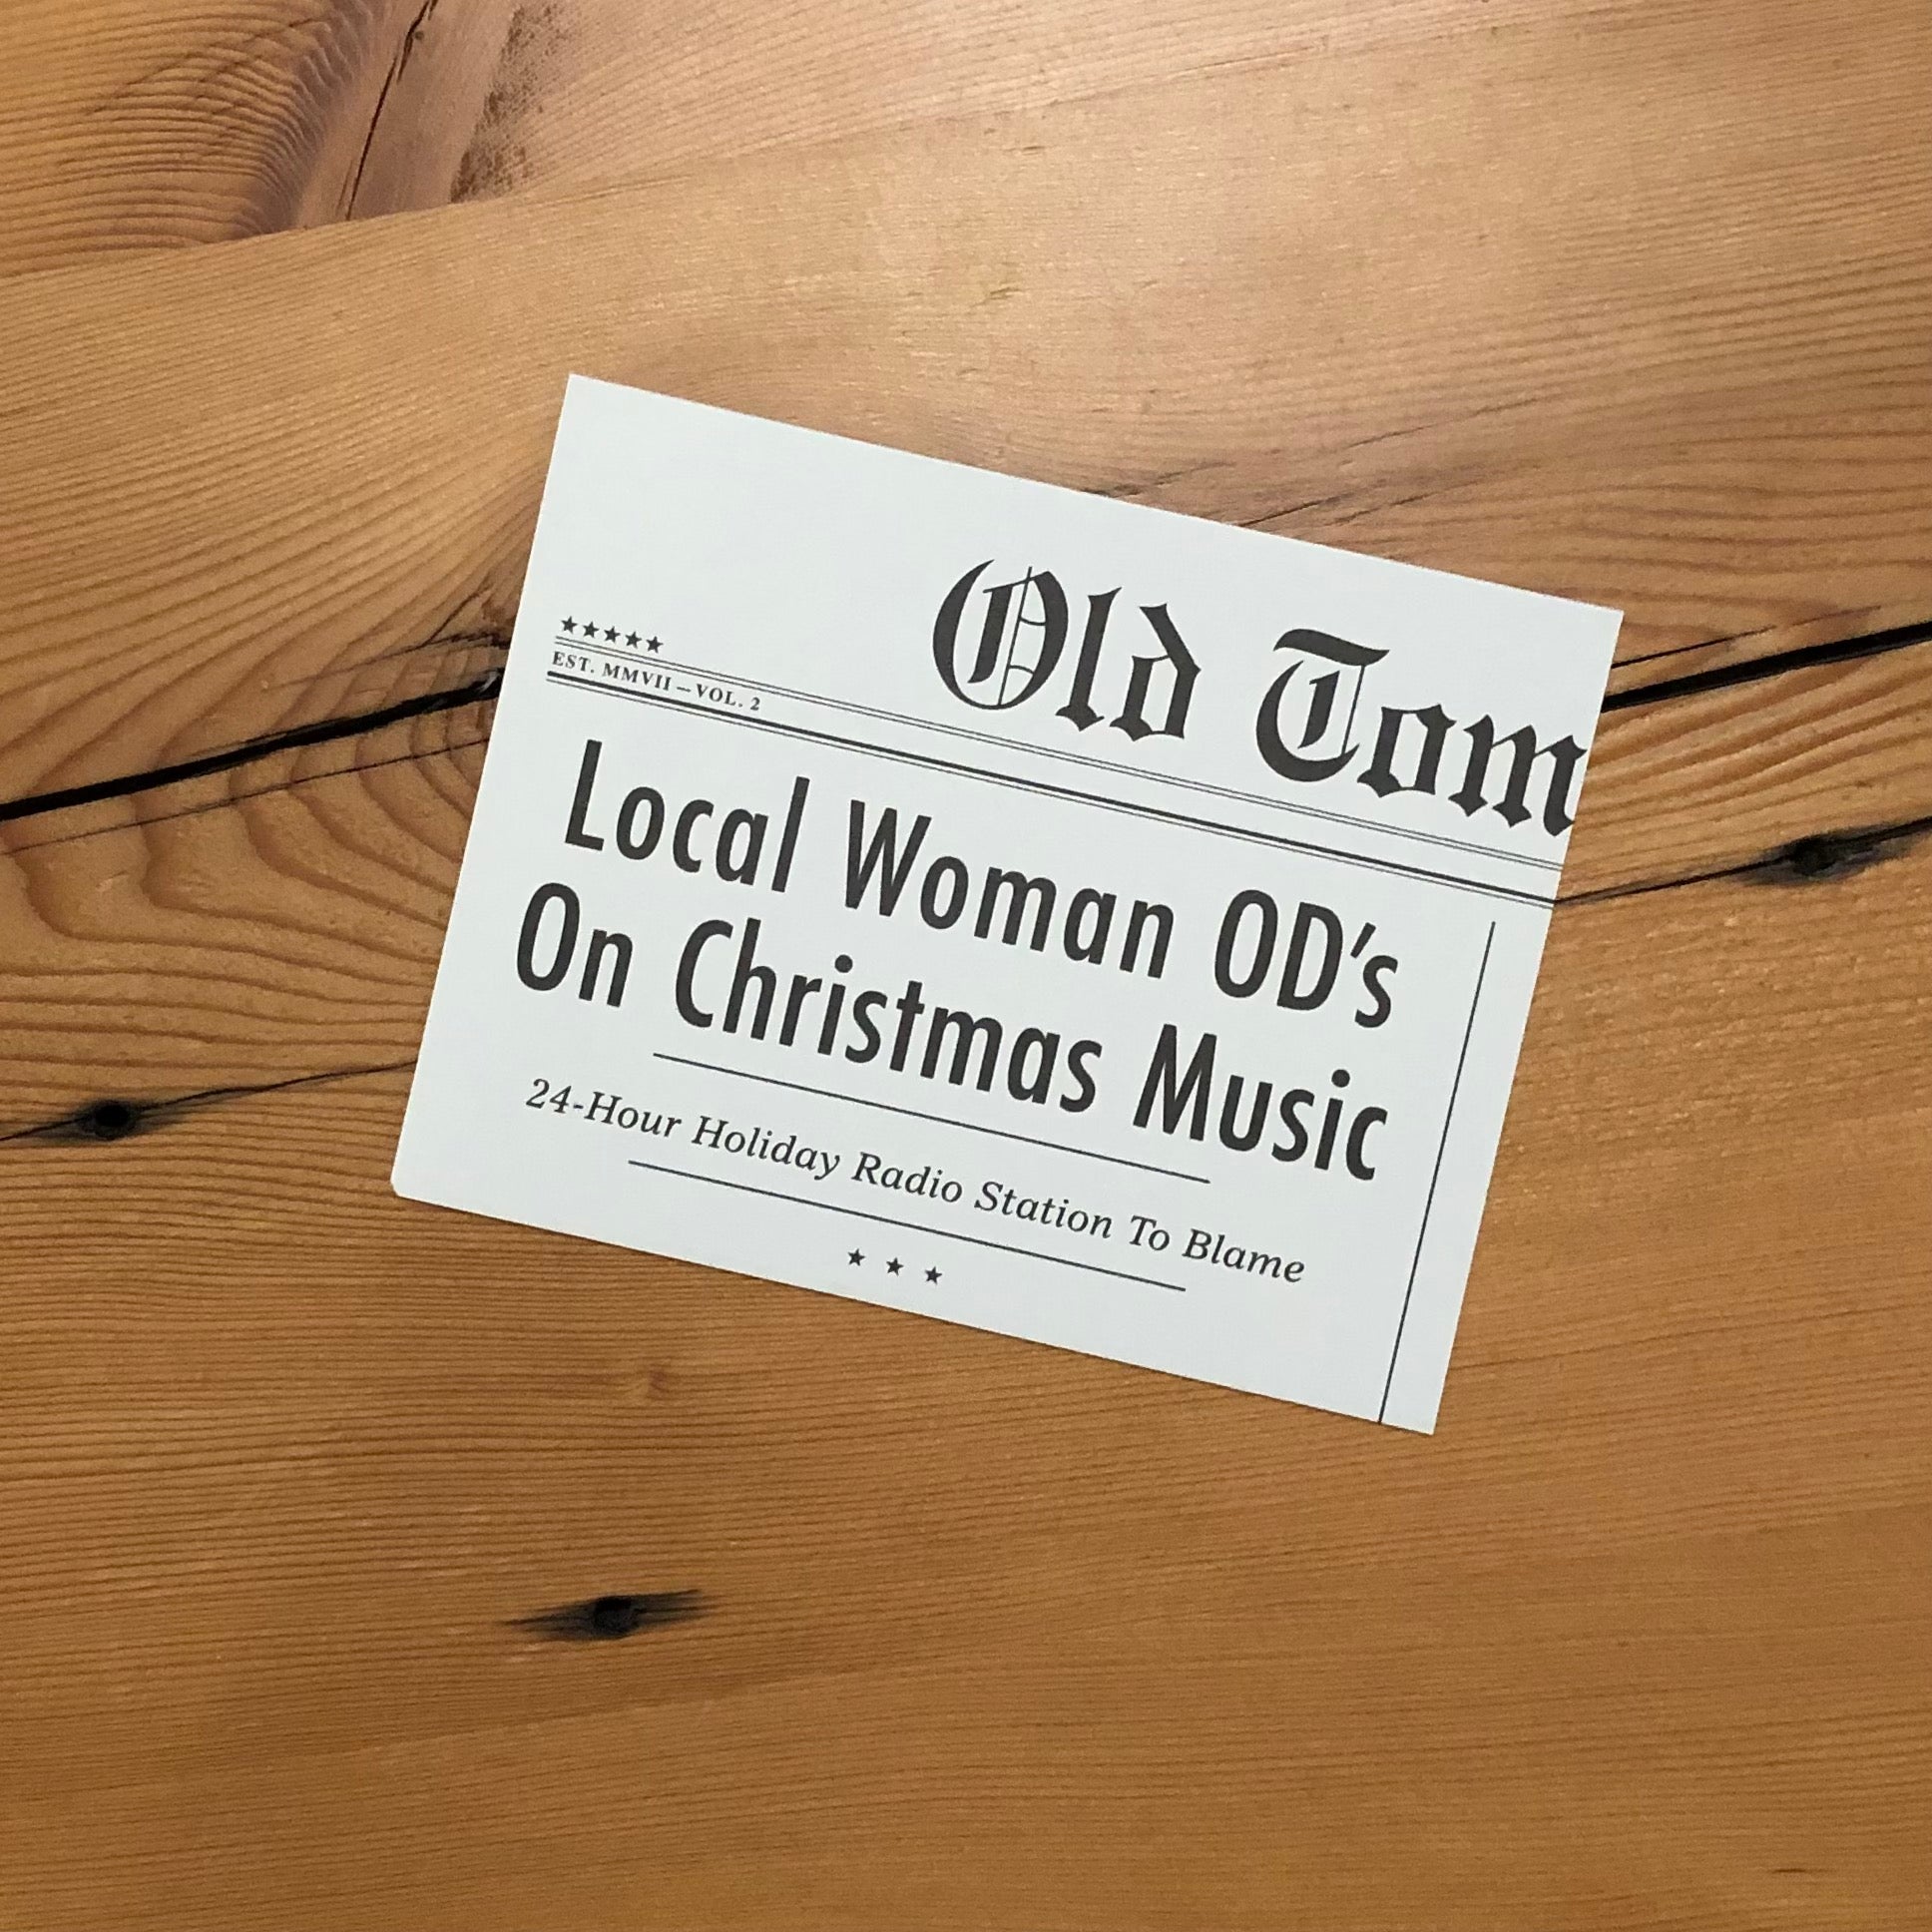 Local Woman OD's on Christmas Music - Boxed Set of 6